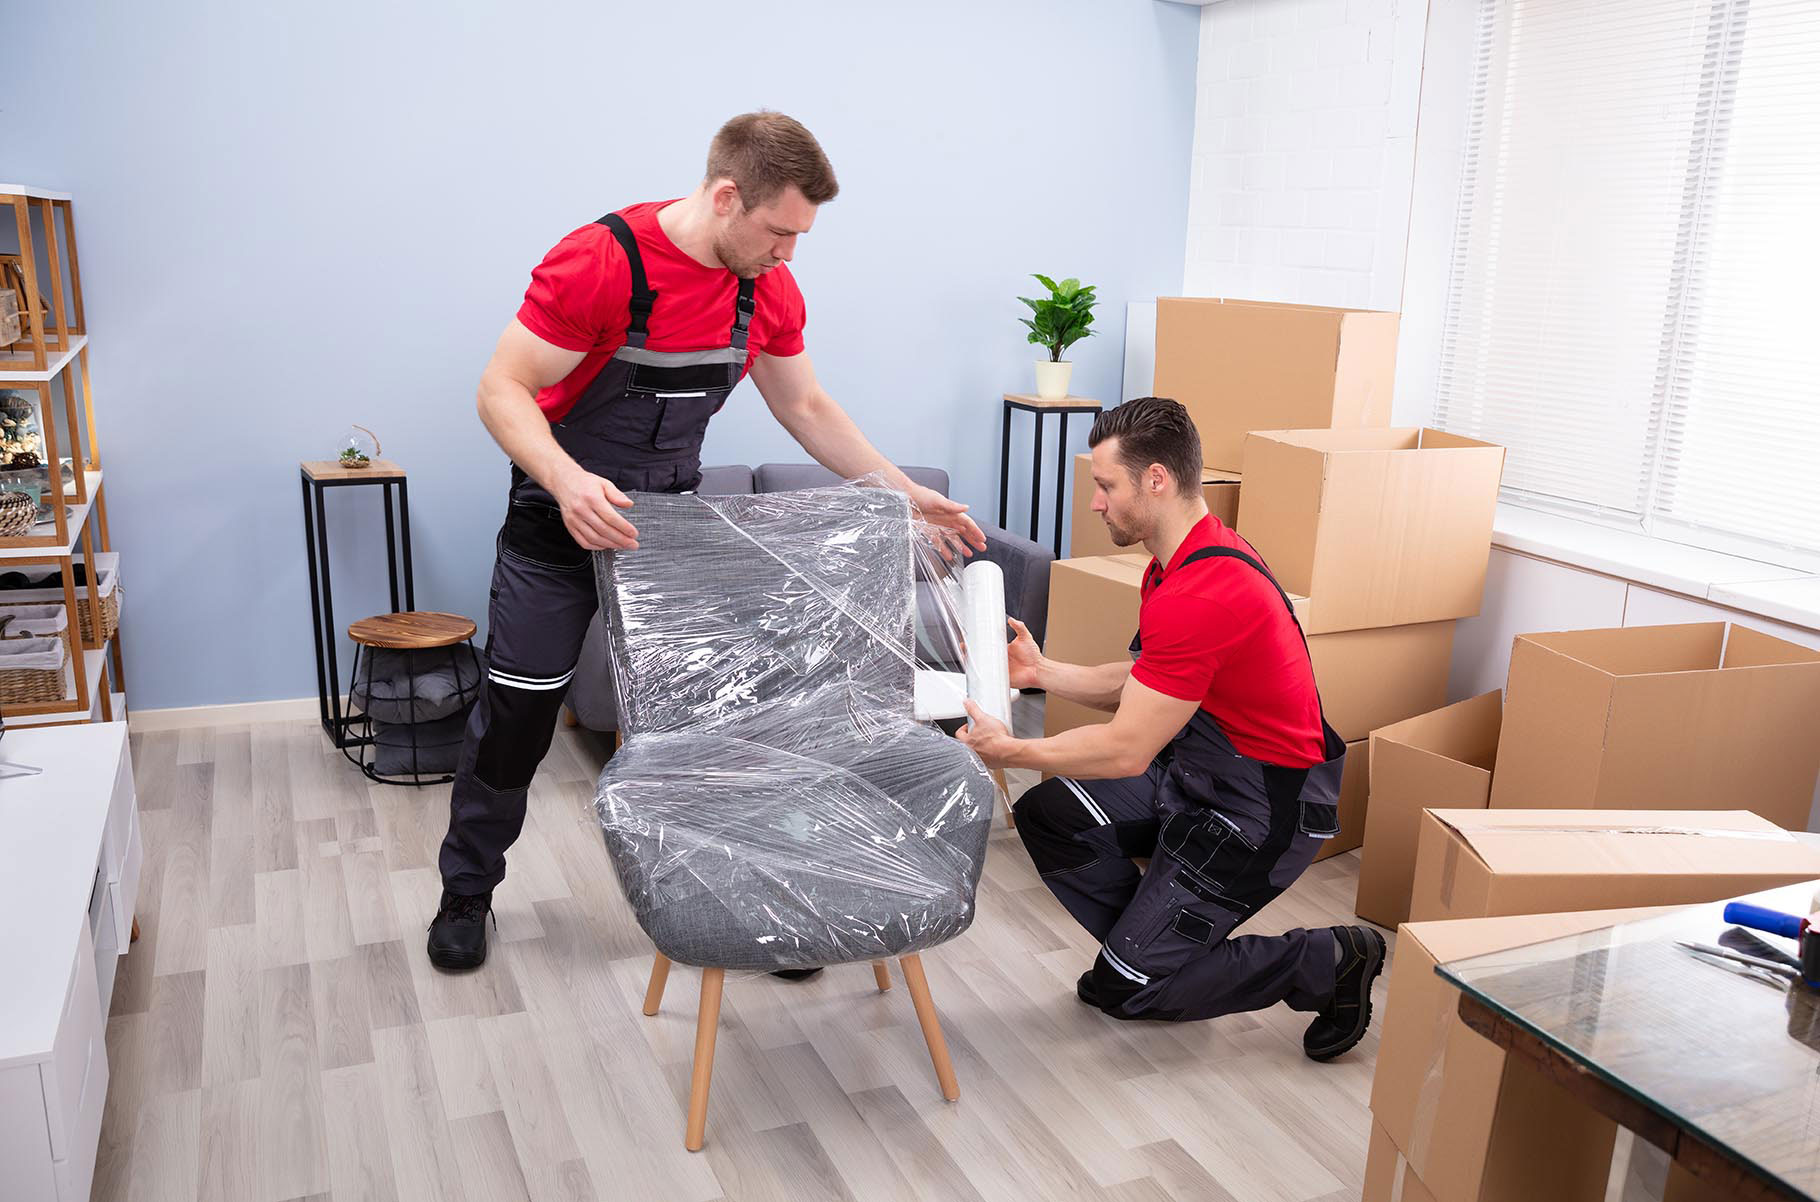 What Tools or Equipment are Needed in Business Relocations?